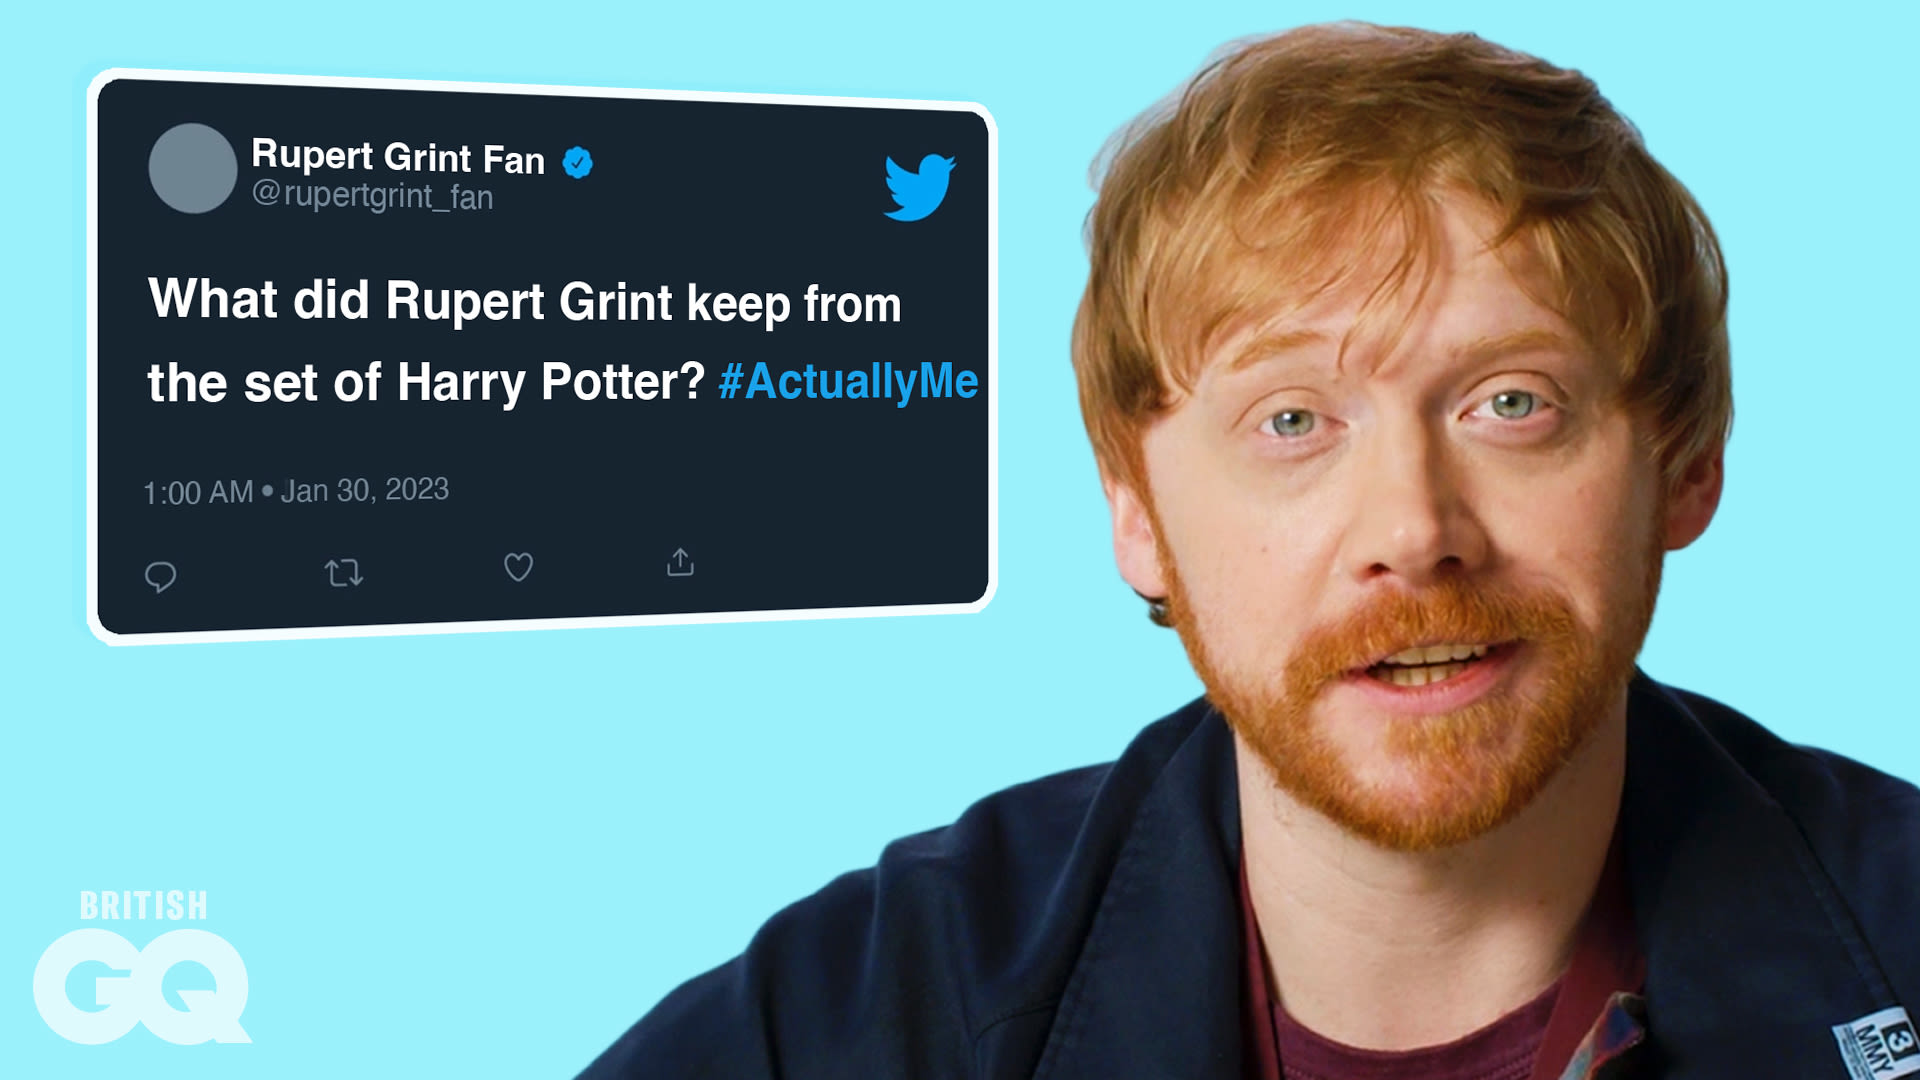 Watch Rupert Grint Answers Your Questions, Actually Me